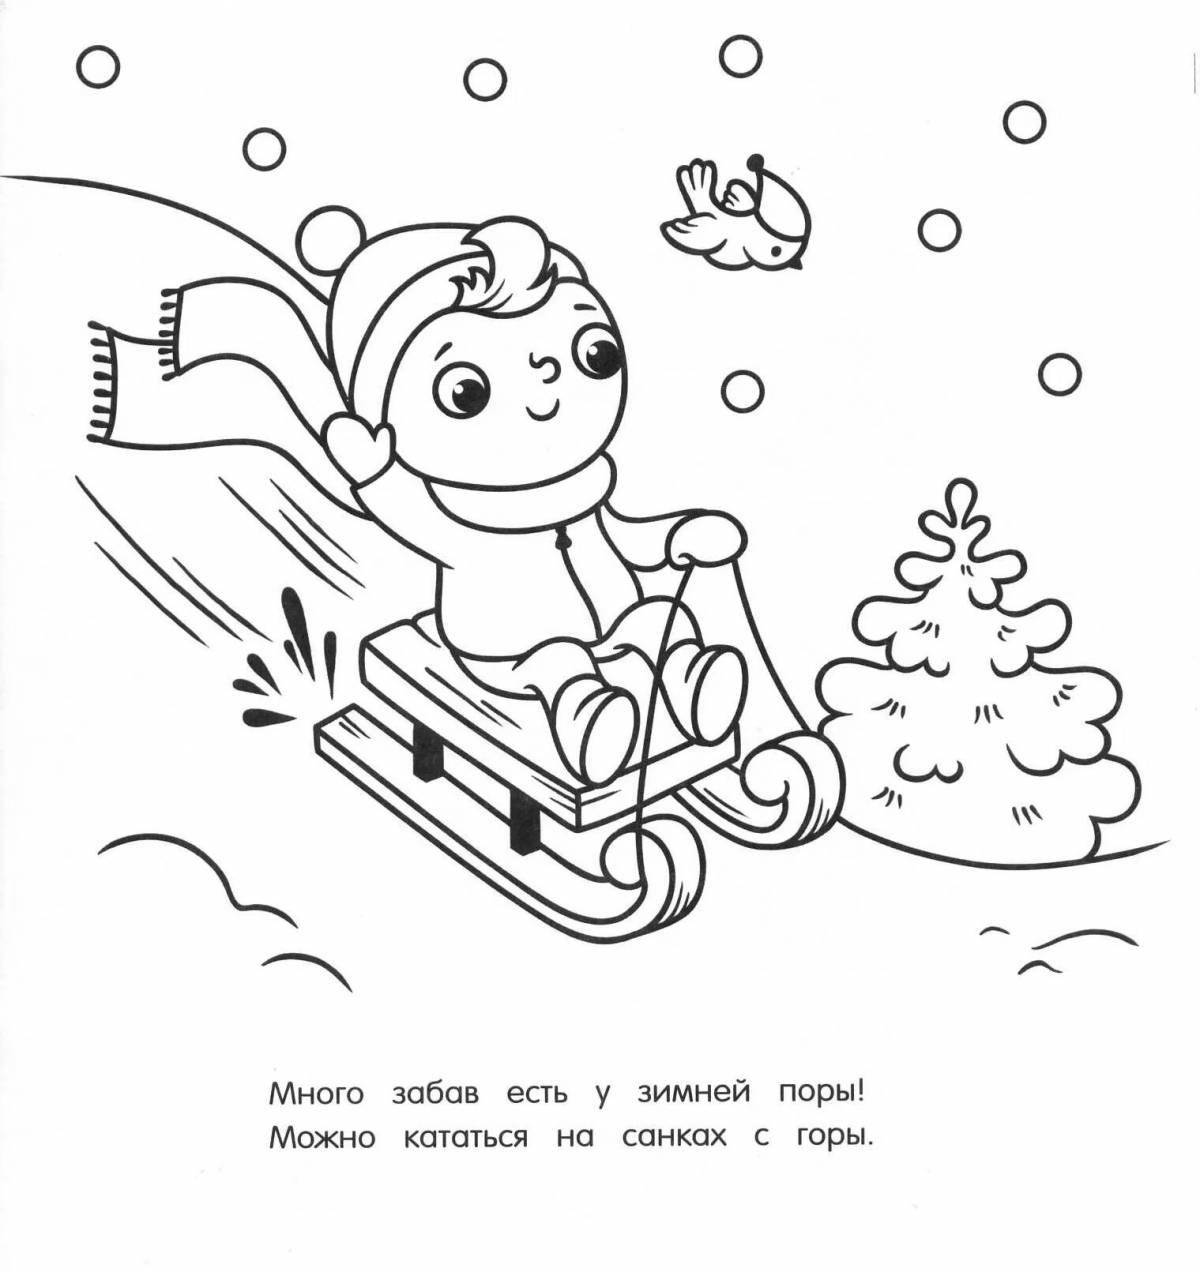 Fun coloring on a sled